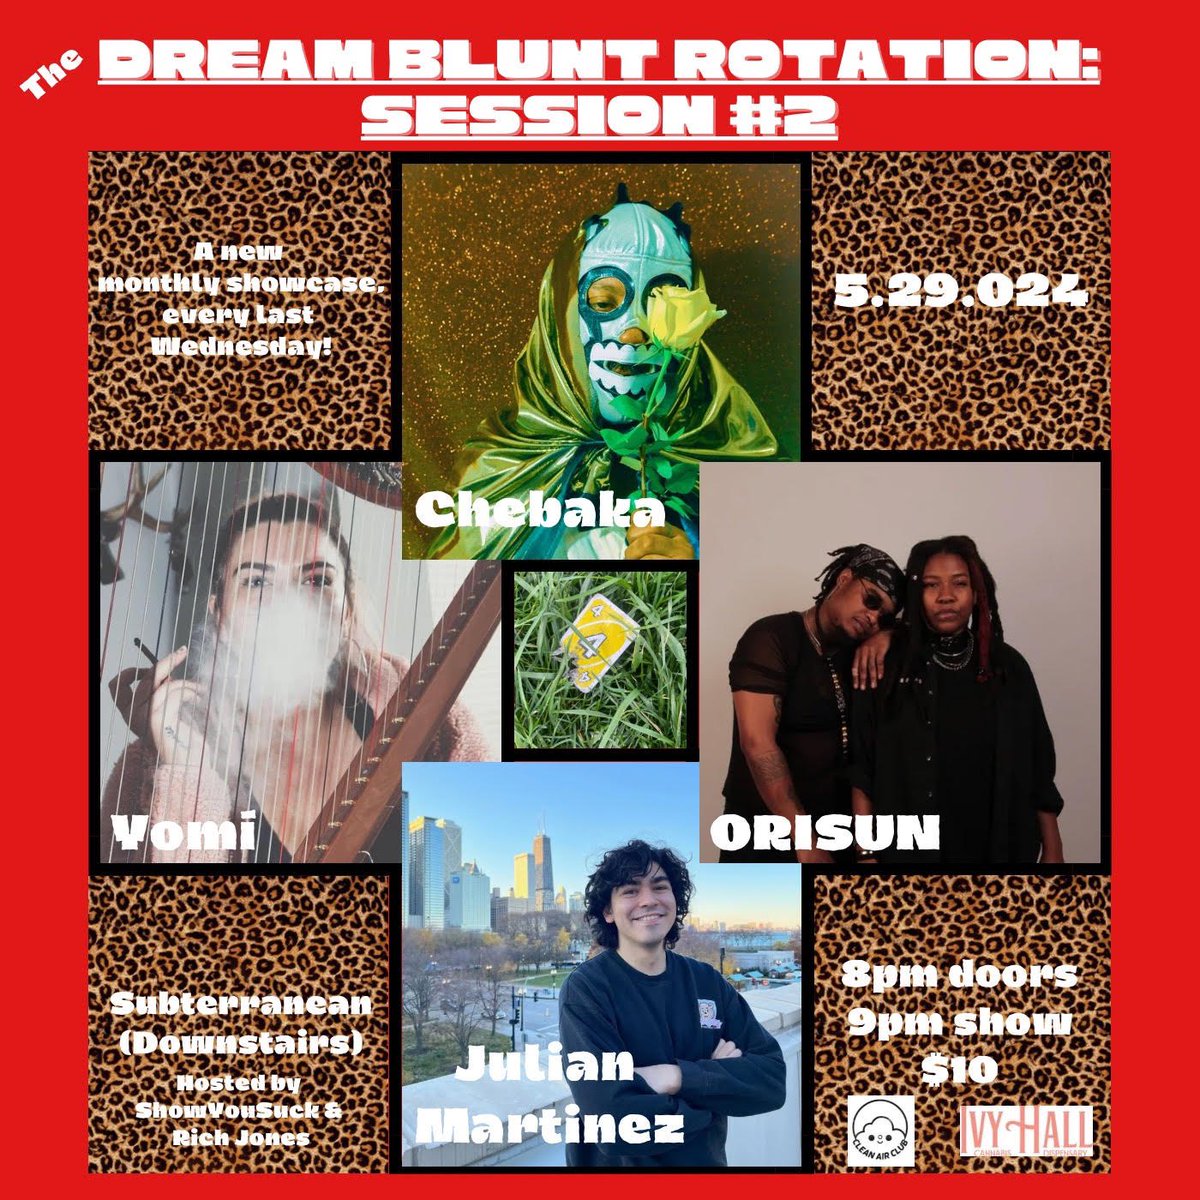 🤯JUST ANNOUNCED🤯 THE DREAM BLUNT ROTATION -Session #2 w/ Chebaka, Yomí, ORISUN & Julian Martinez Hosted by: Rich Jones & ShowYouSuck Wednesday, May 29 | 21+ Tickets @ subt.net